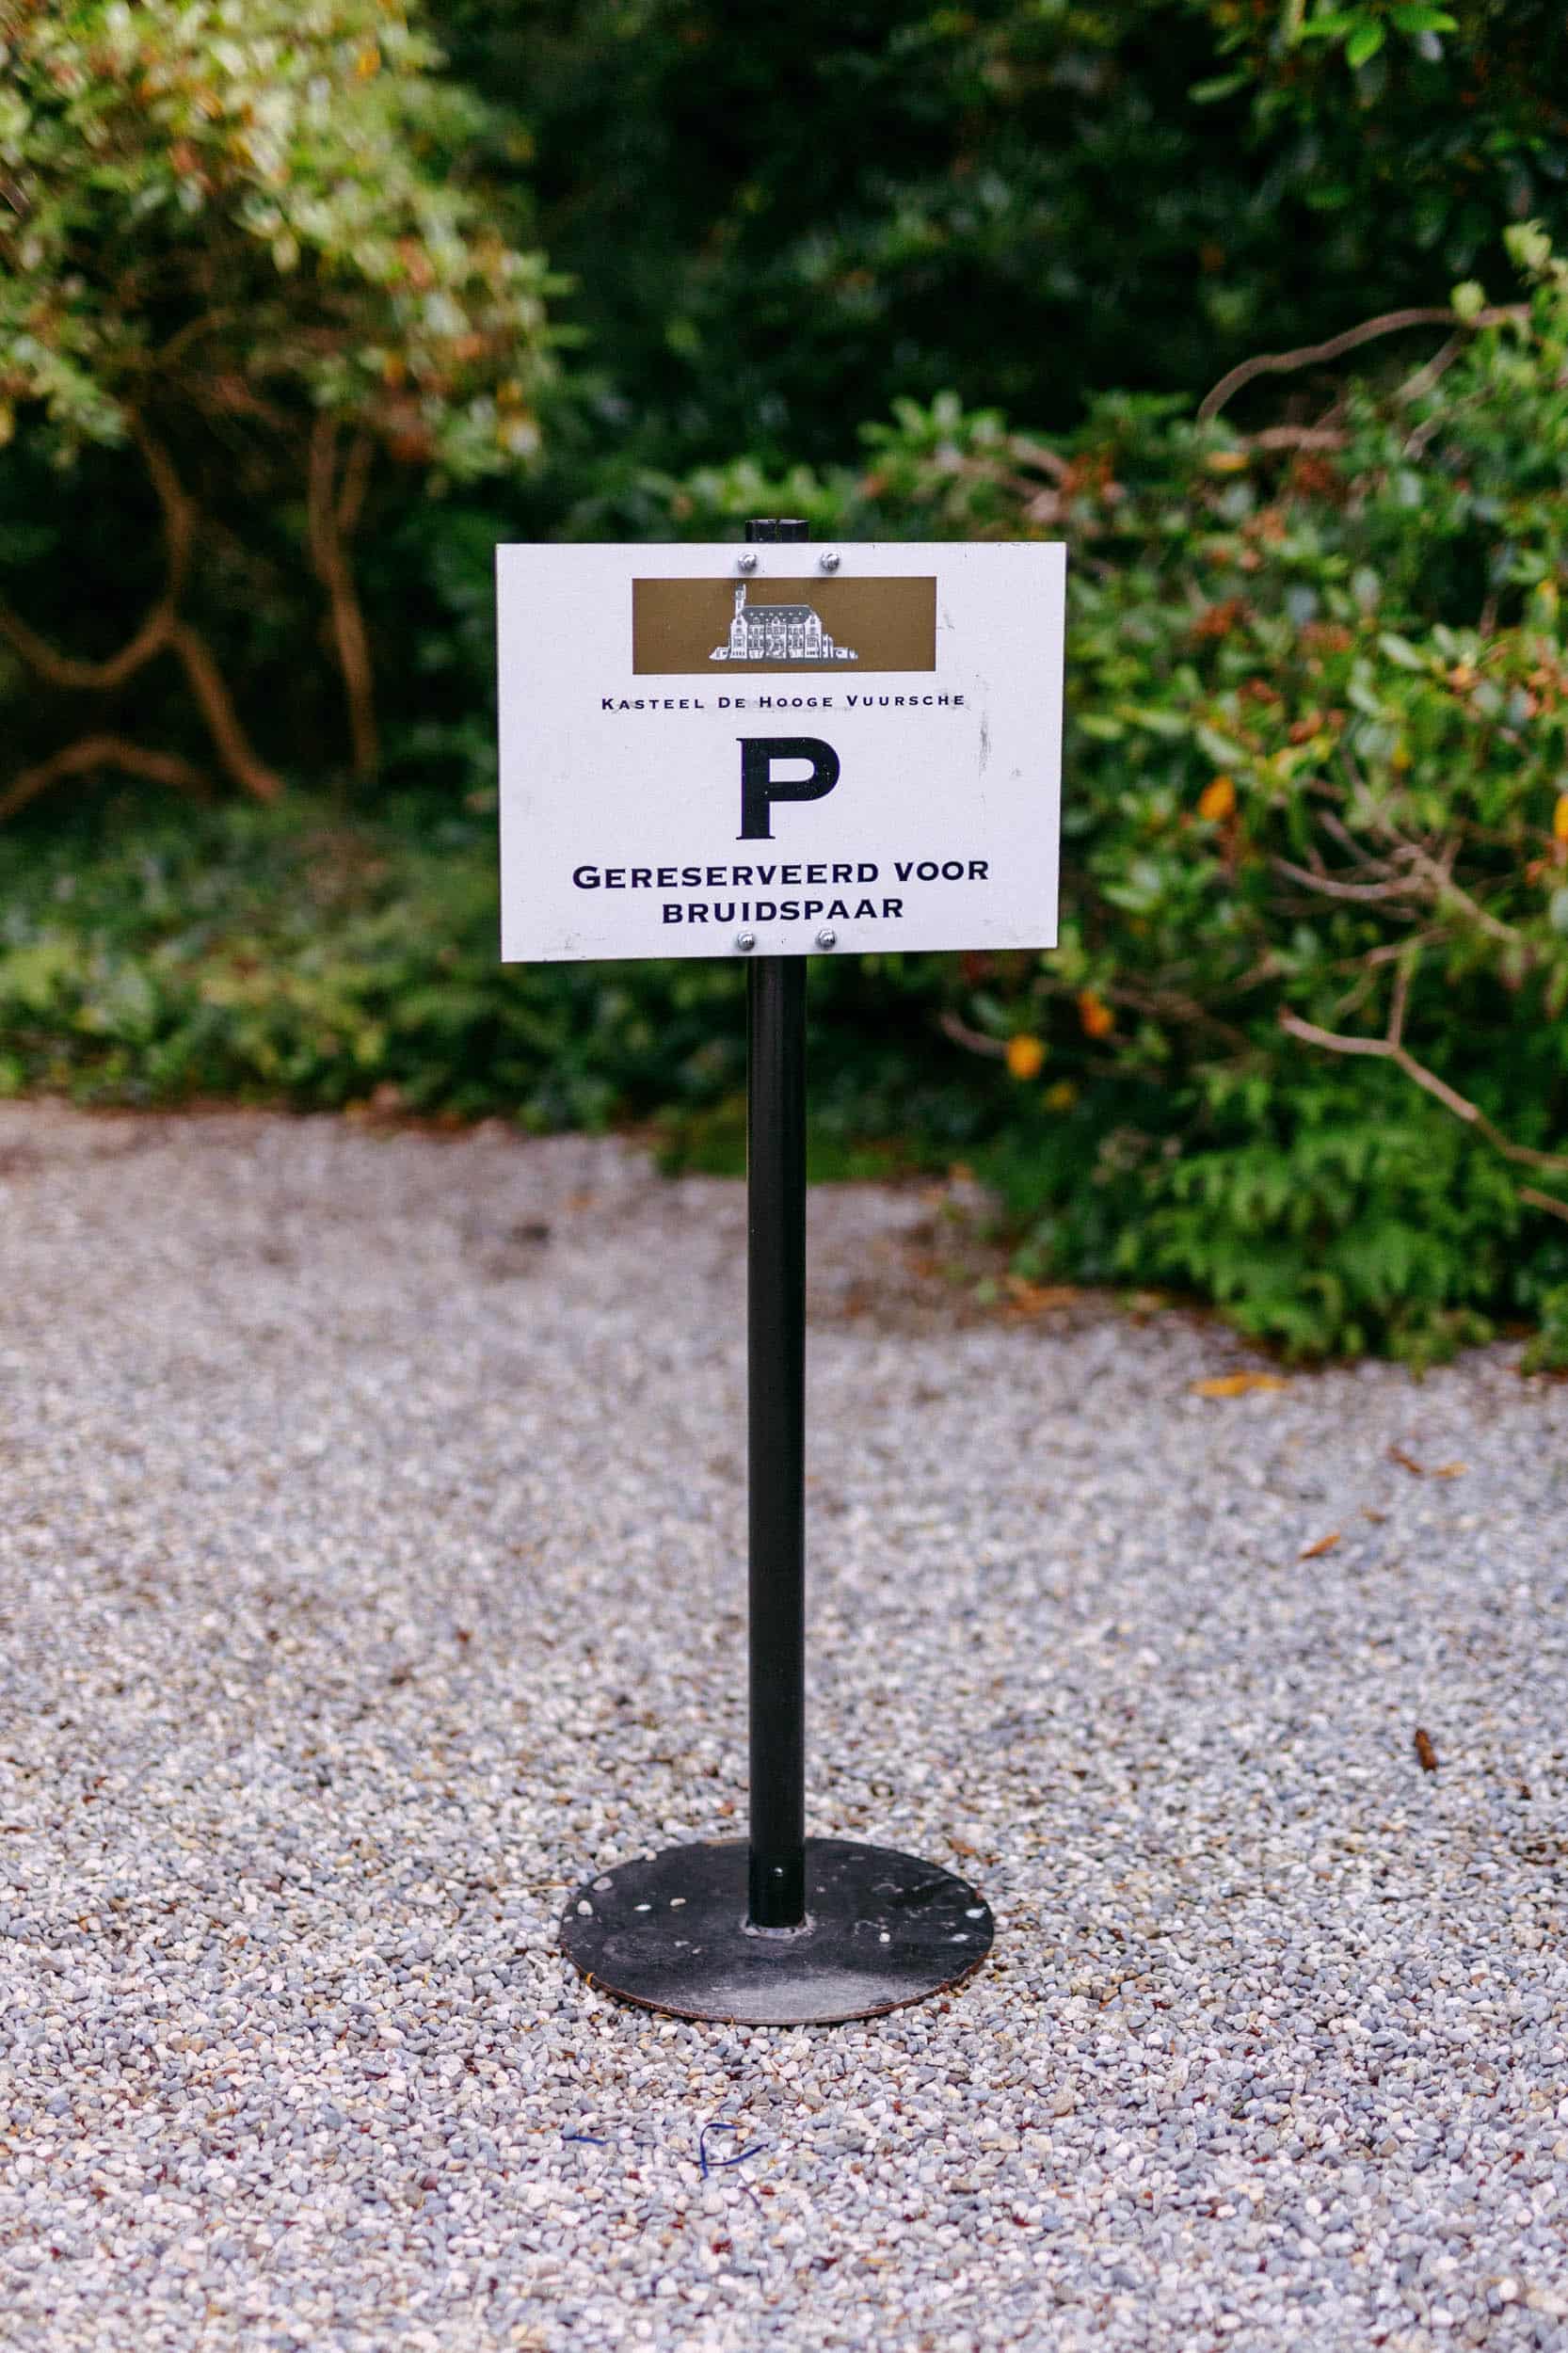 A parking sign for bushes.